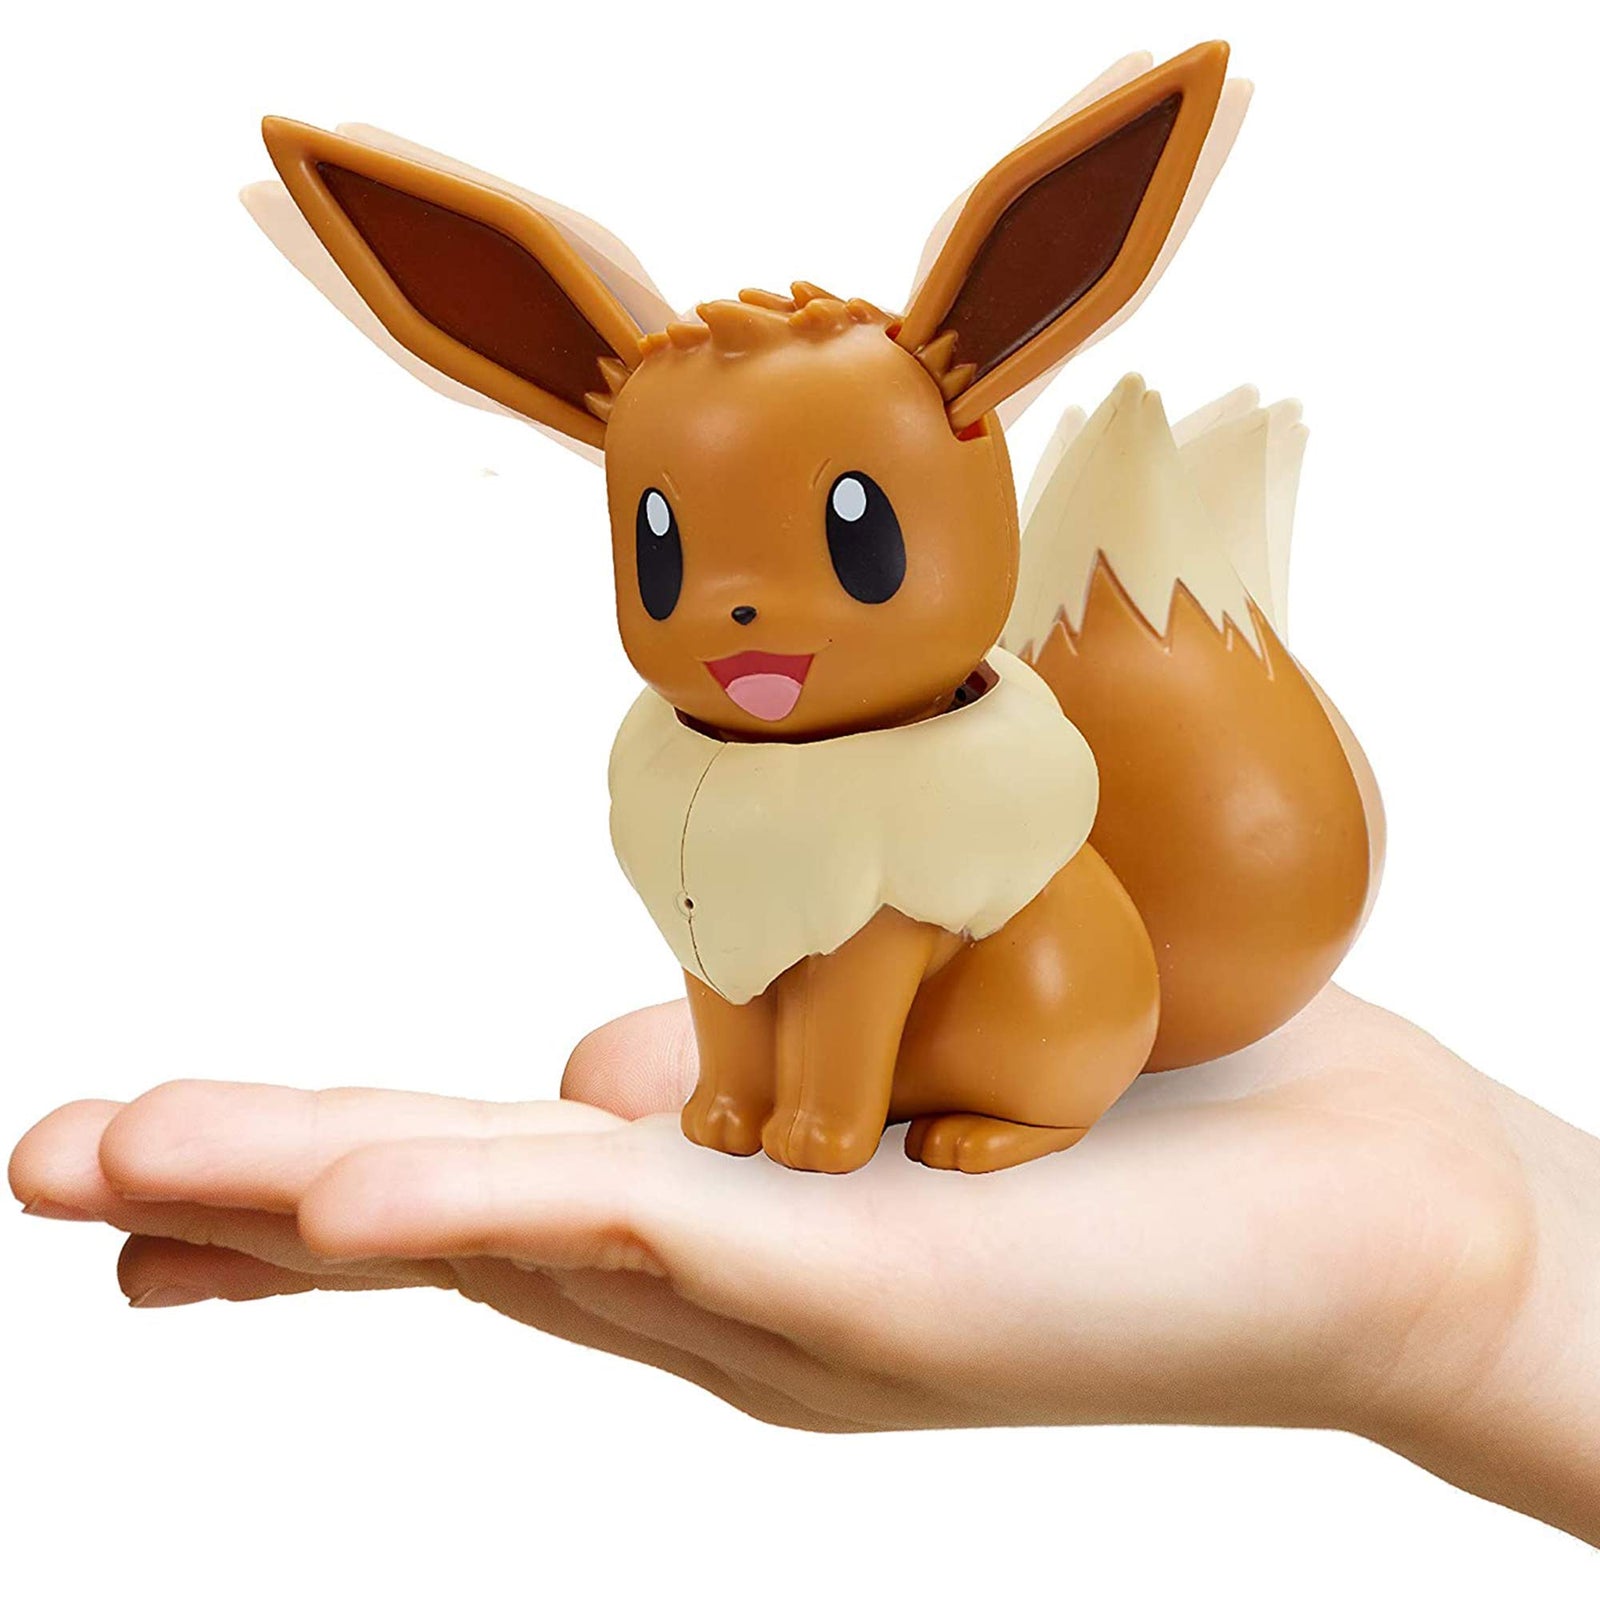 Pokemon Electronic & Interactive My Partner Eevee - Reacts to Touch & Sound, Over 50 Different Interactions with Movement and Sound - Eevee Dances, Moves & Speaks - Gotta Catch ‘Em All , Brown